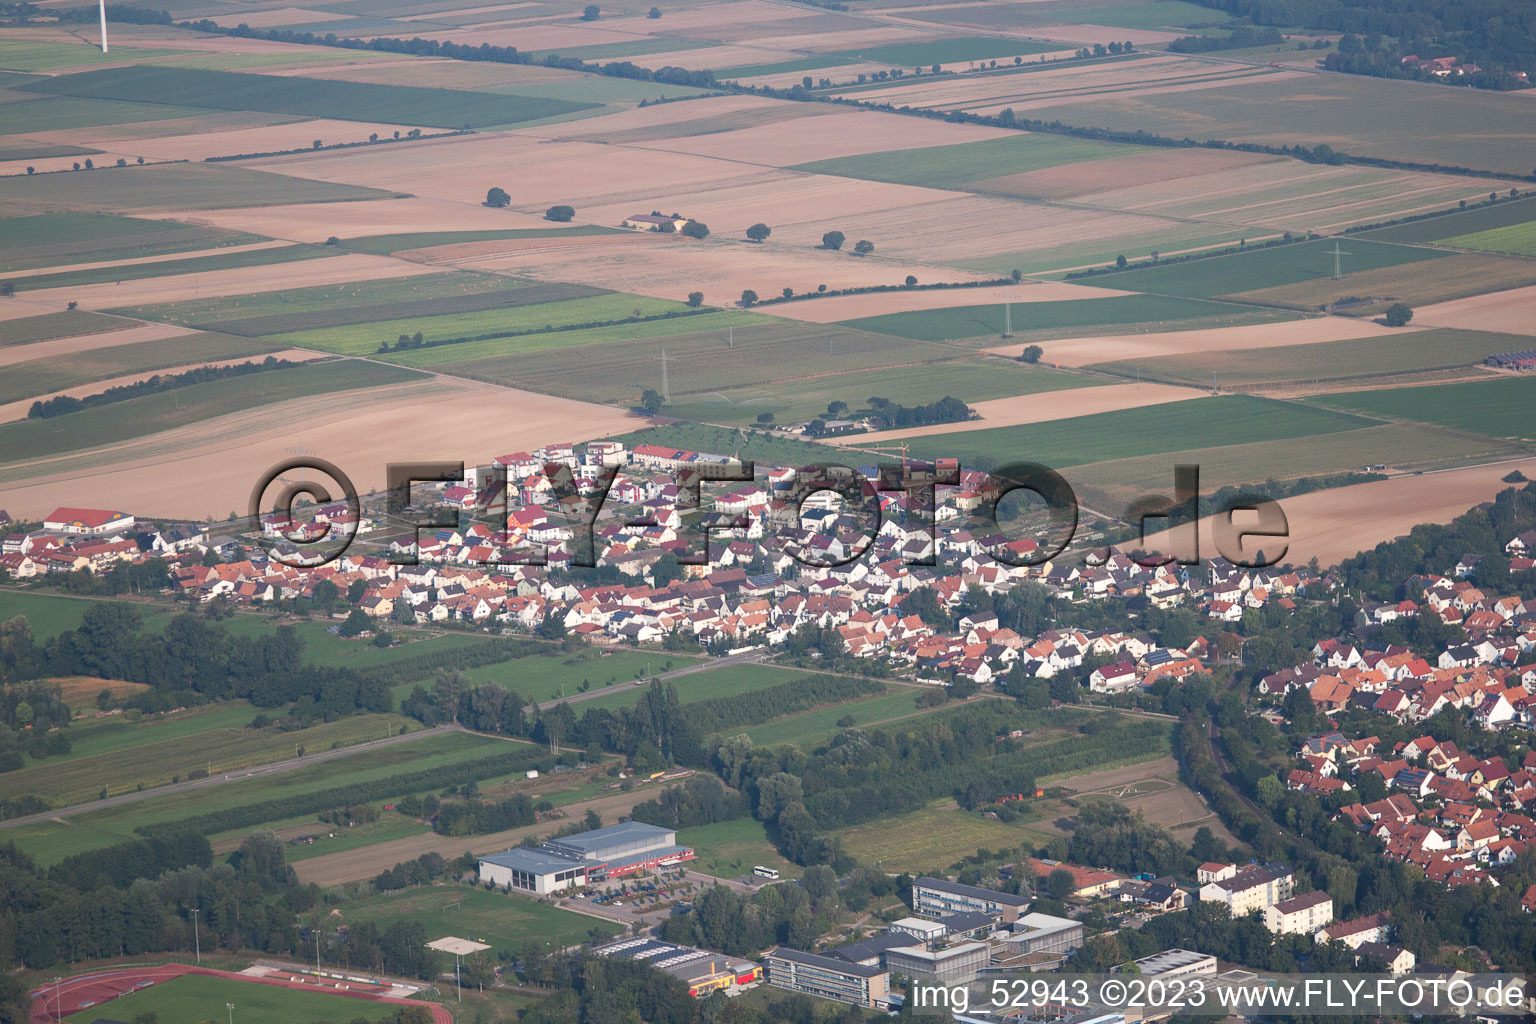 Höhenweg new development area in Kandel in the state Rhineland-Palatinate, Germany seen from above